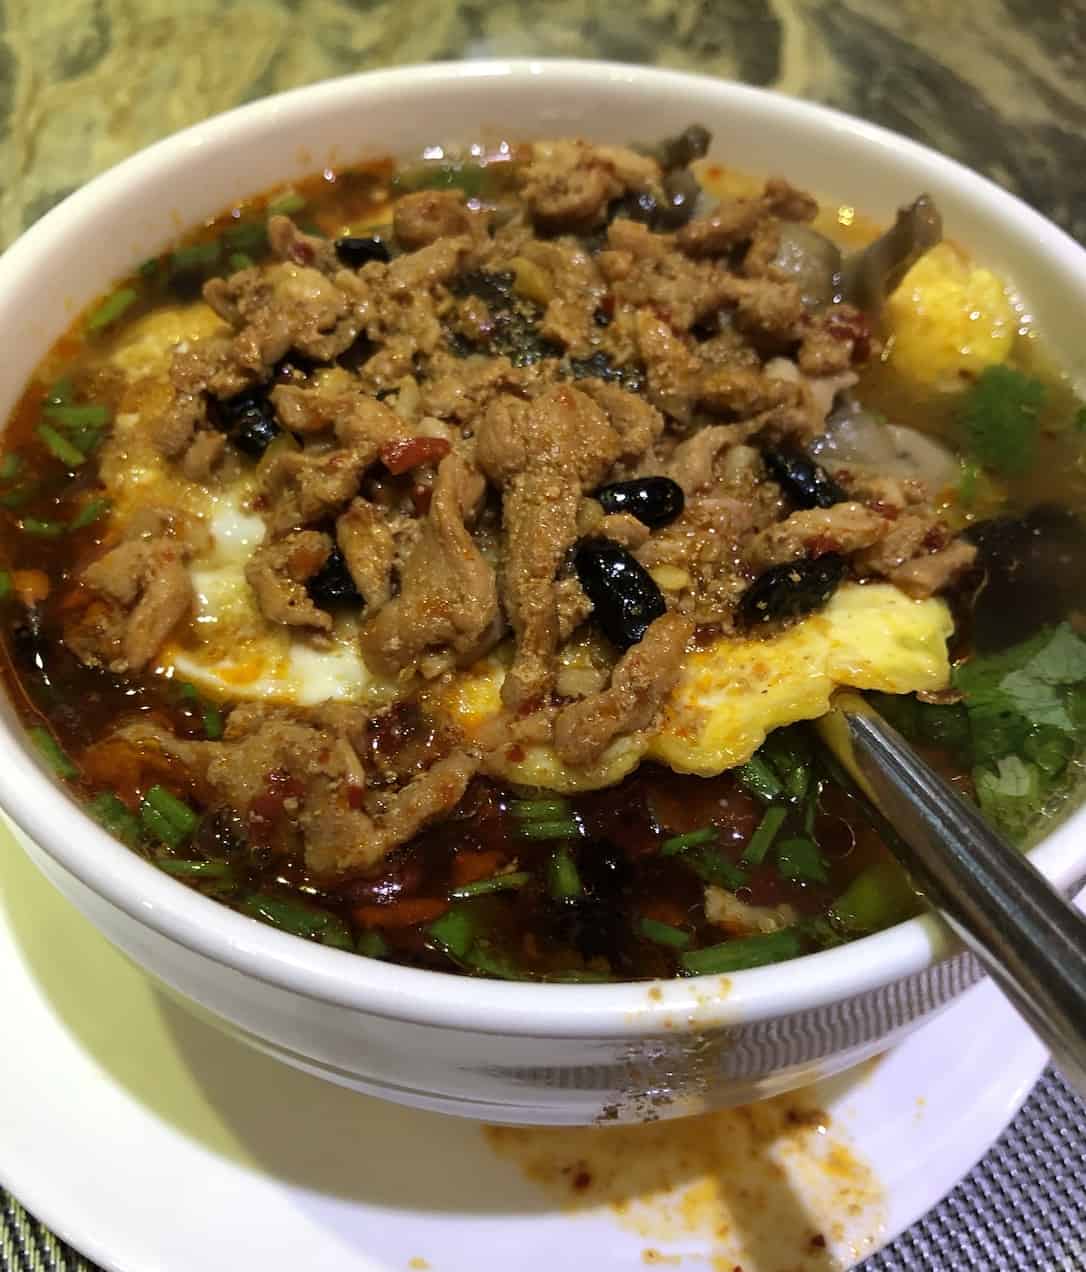 breakfast noodles in Changsha China